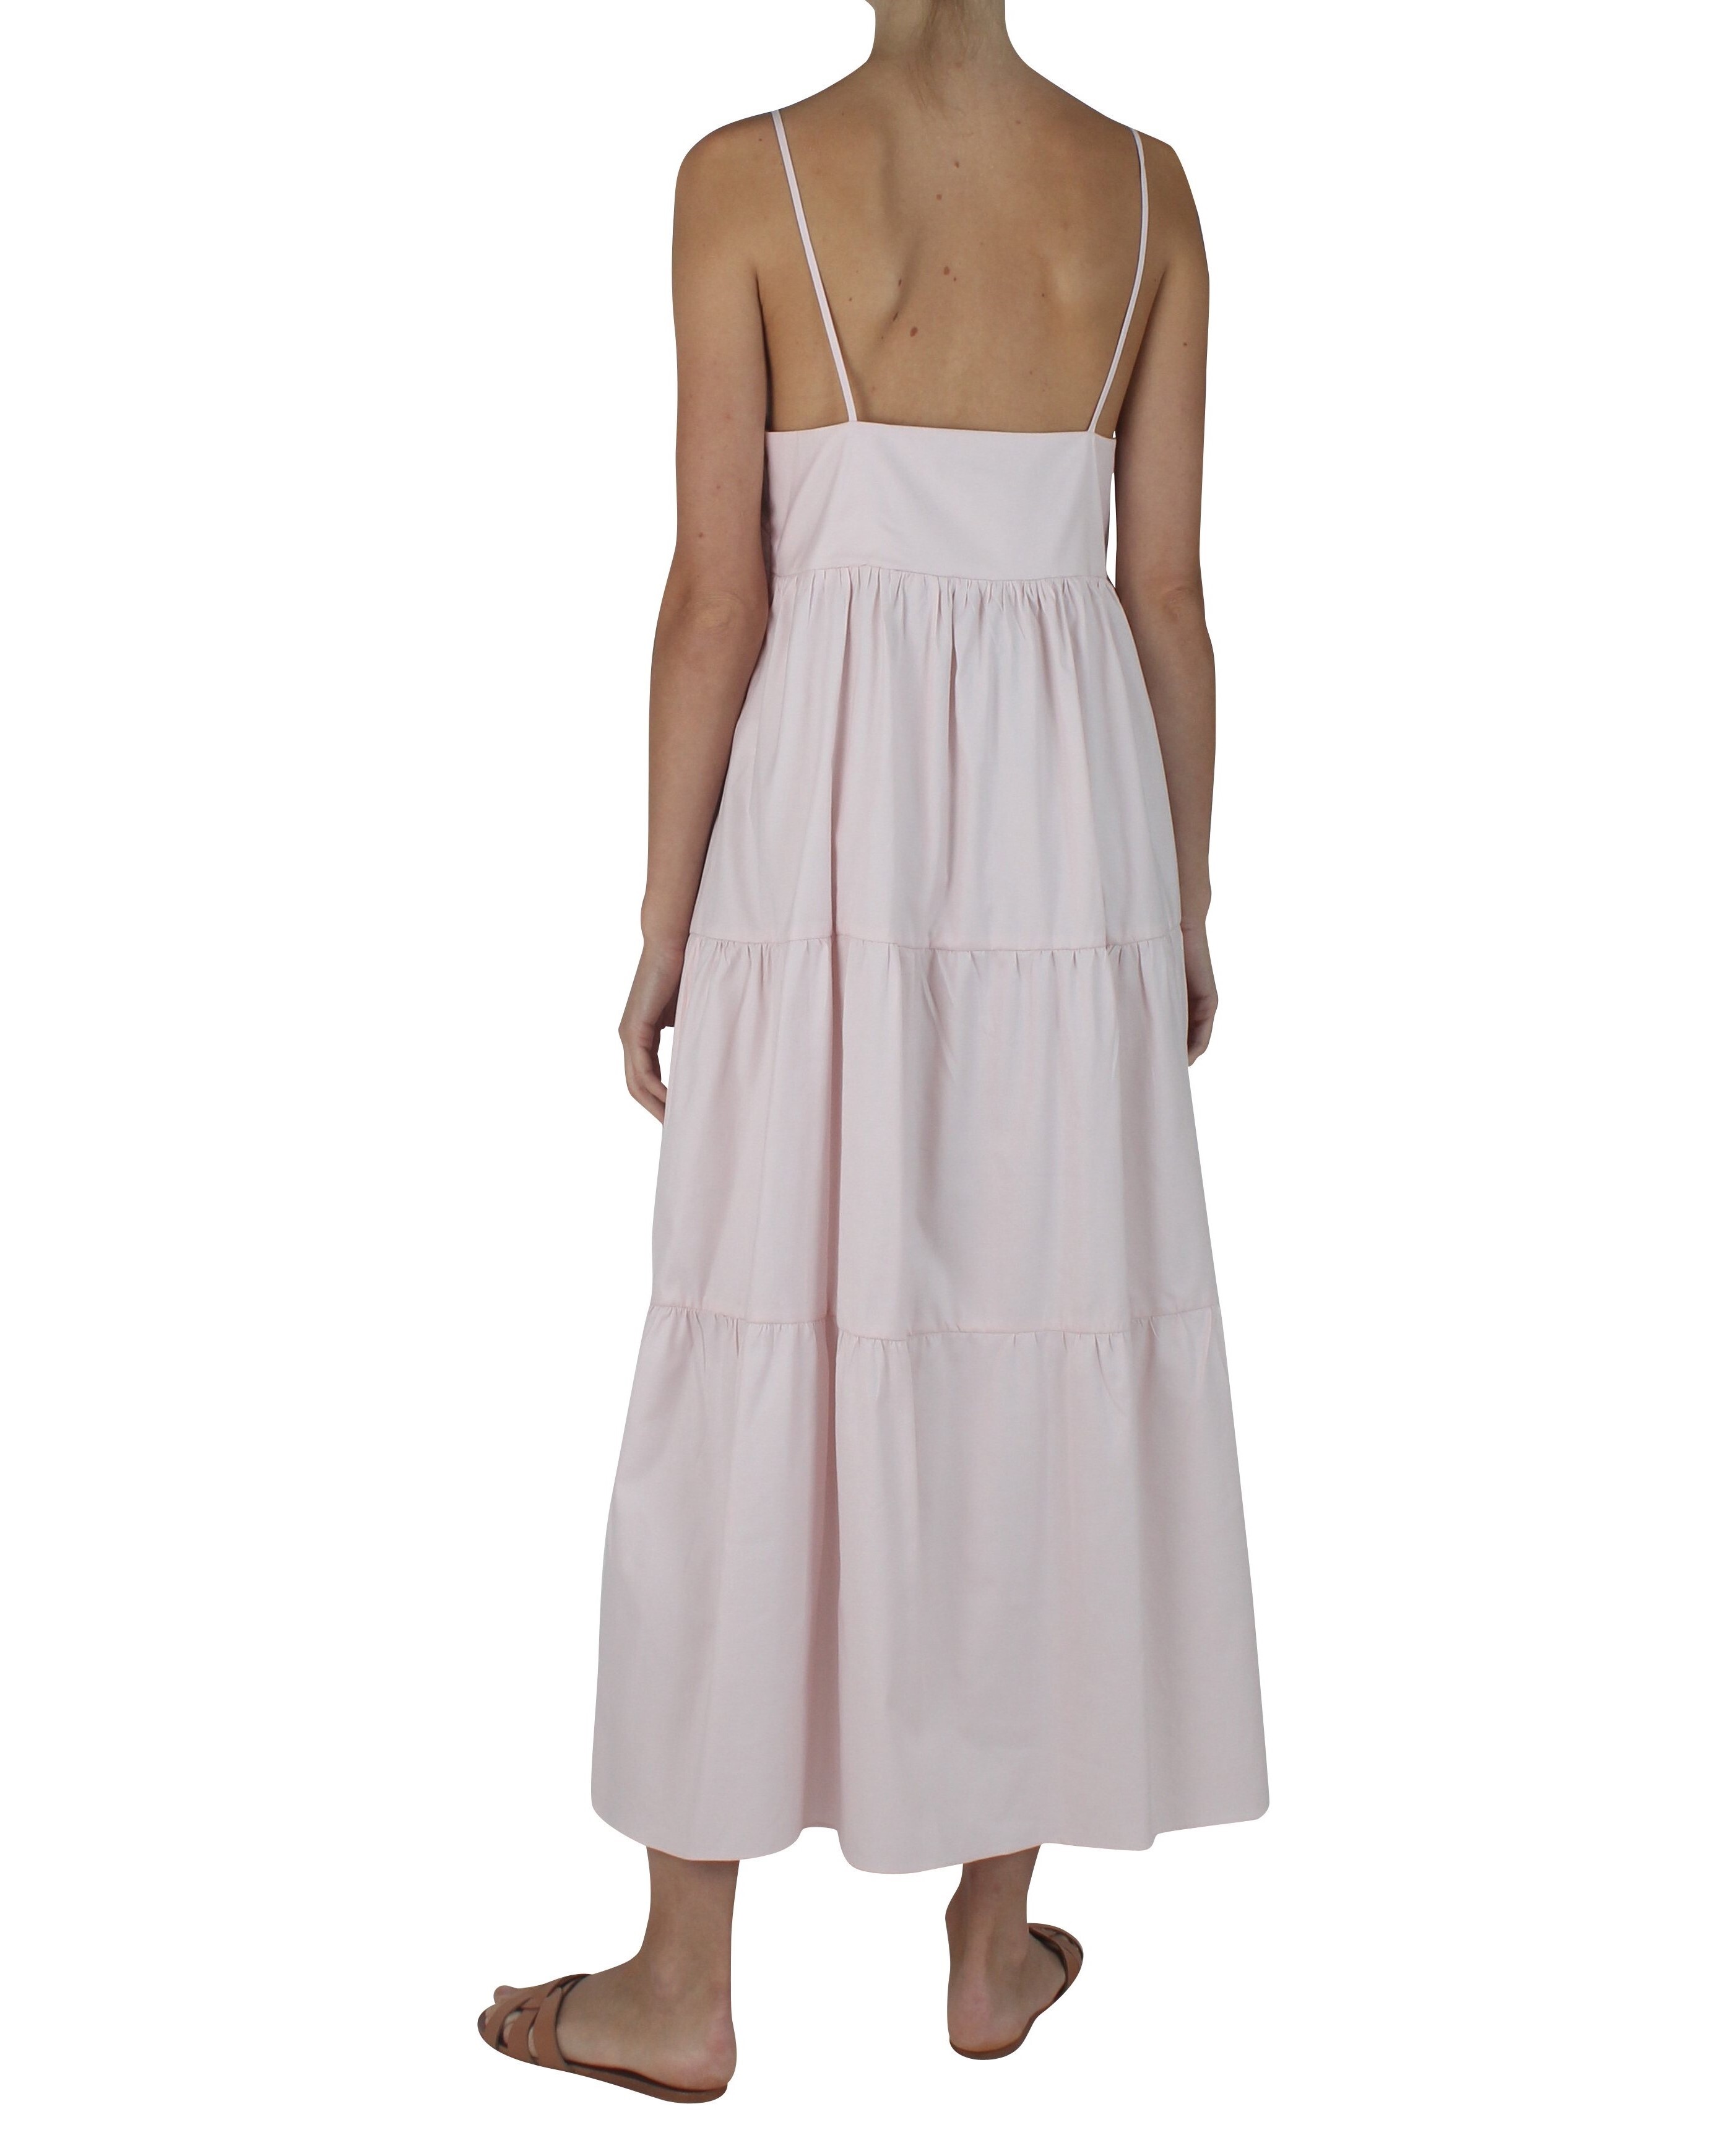 CAPRI DRESS (PINK)- MUSEUM CLOTHING SUMMER 21 Boxing Day Sale